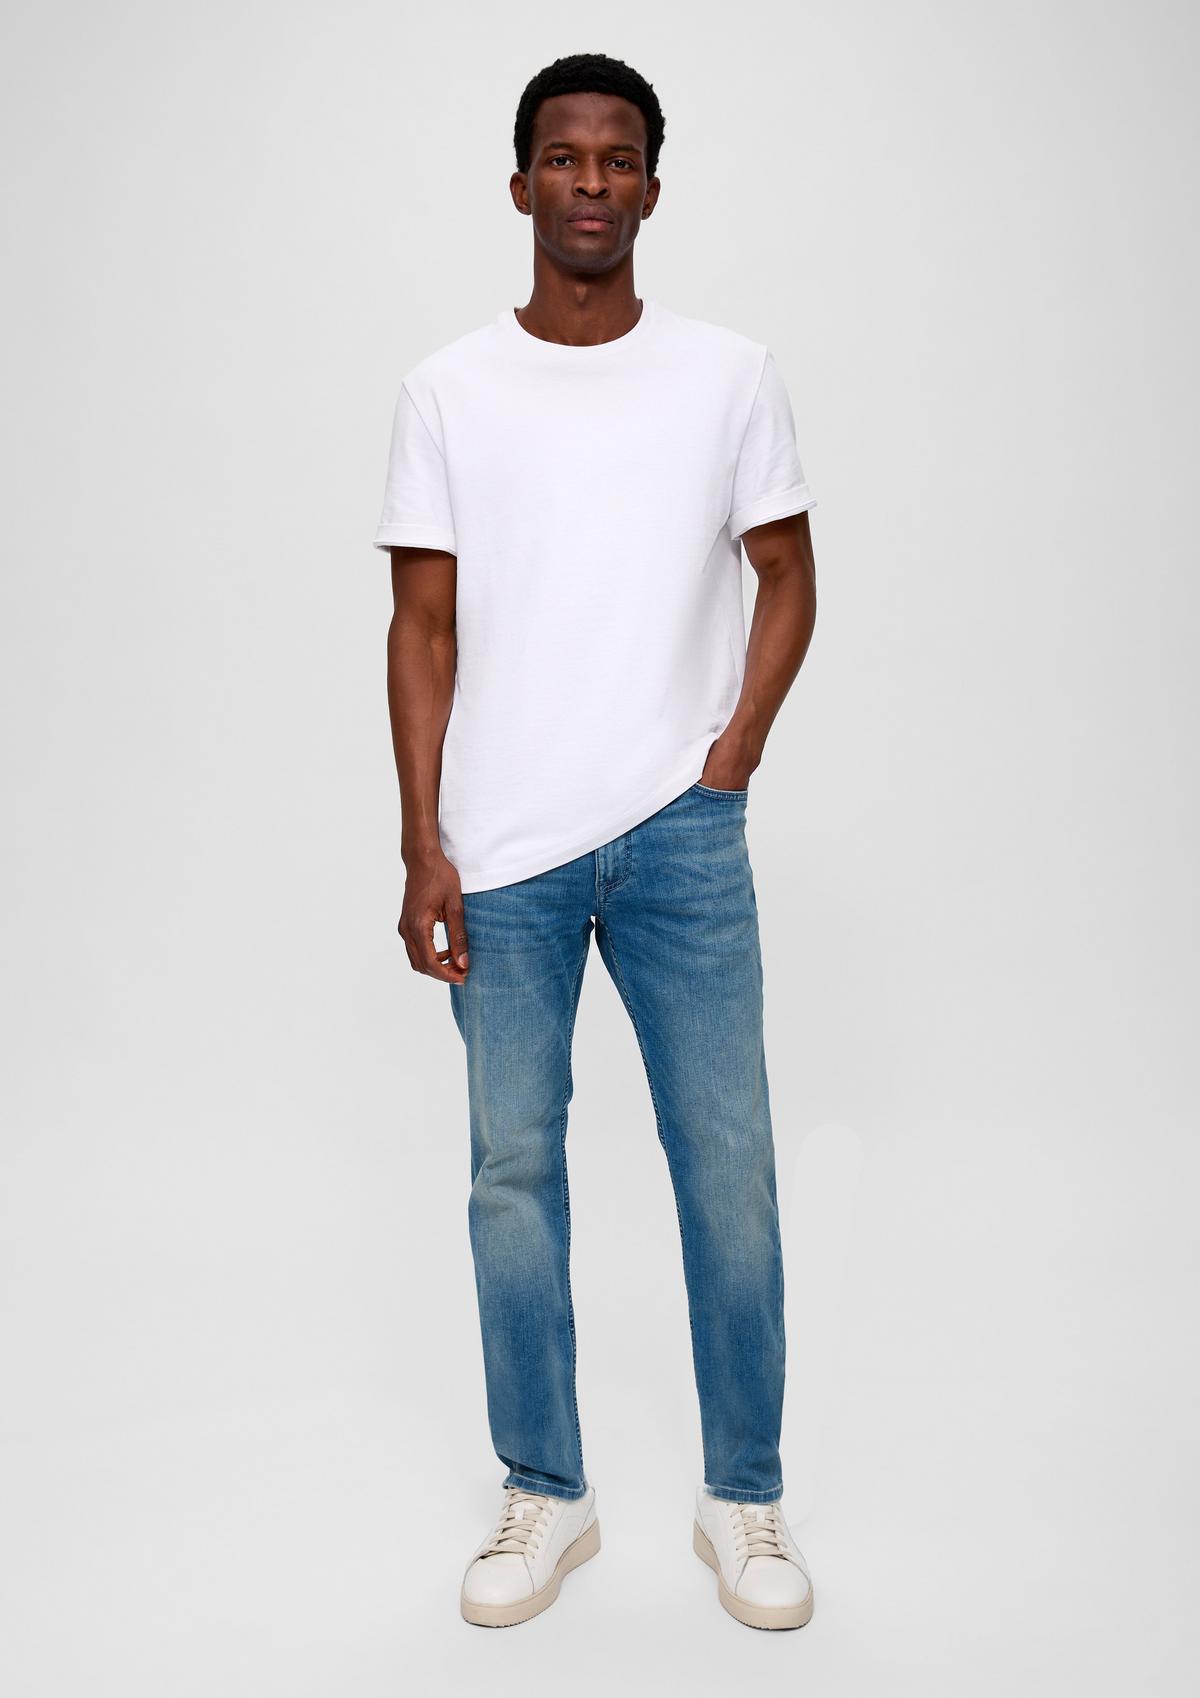 s.Oliver Jeans Keith / Slim Fit / Mid Rise / Straight Leg / Label Patch